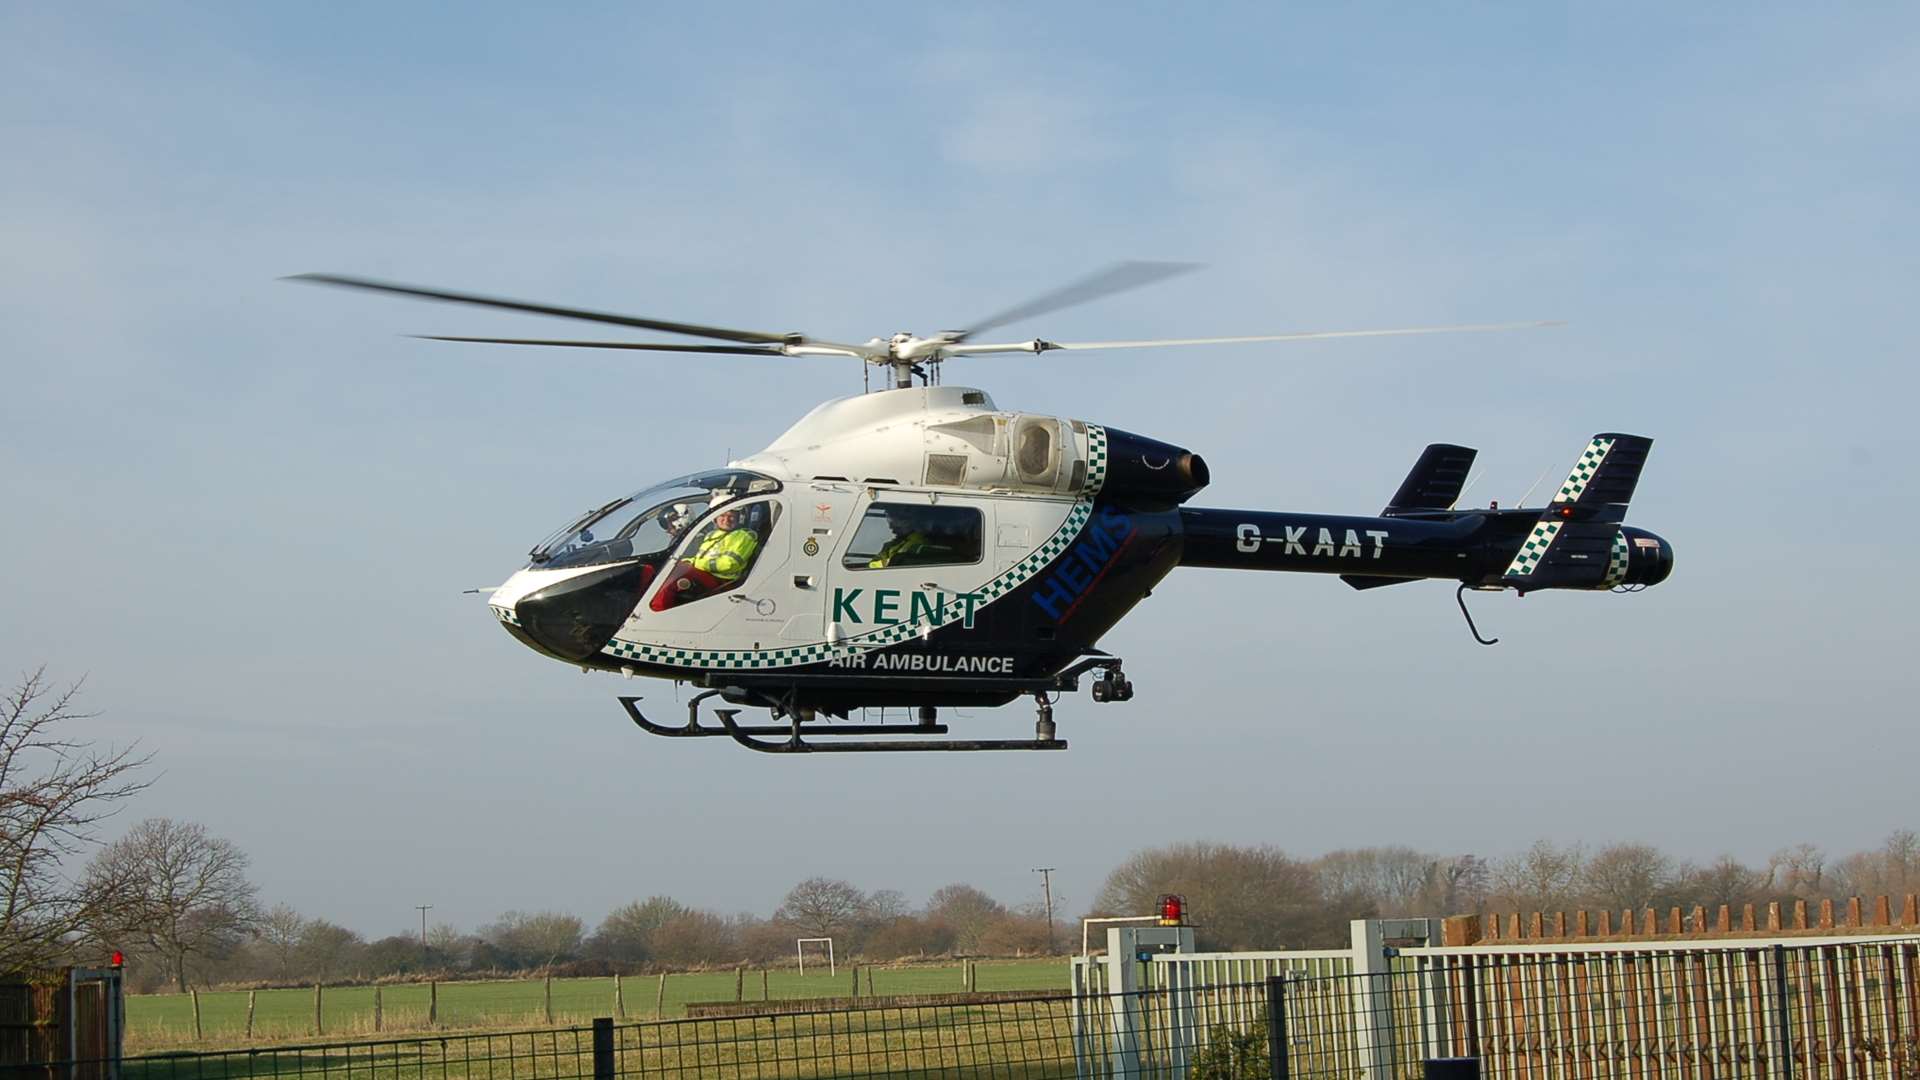 The Kent, Surrey and Sussex Air Ambulance